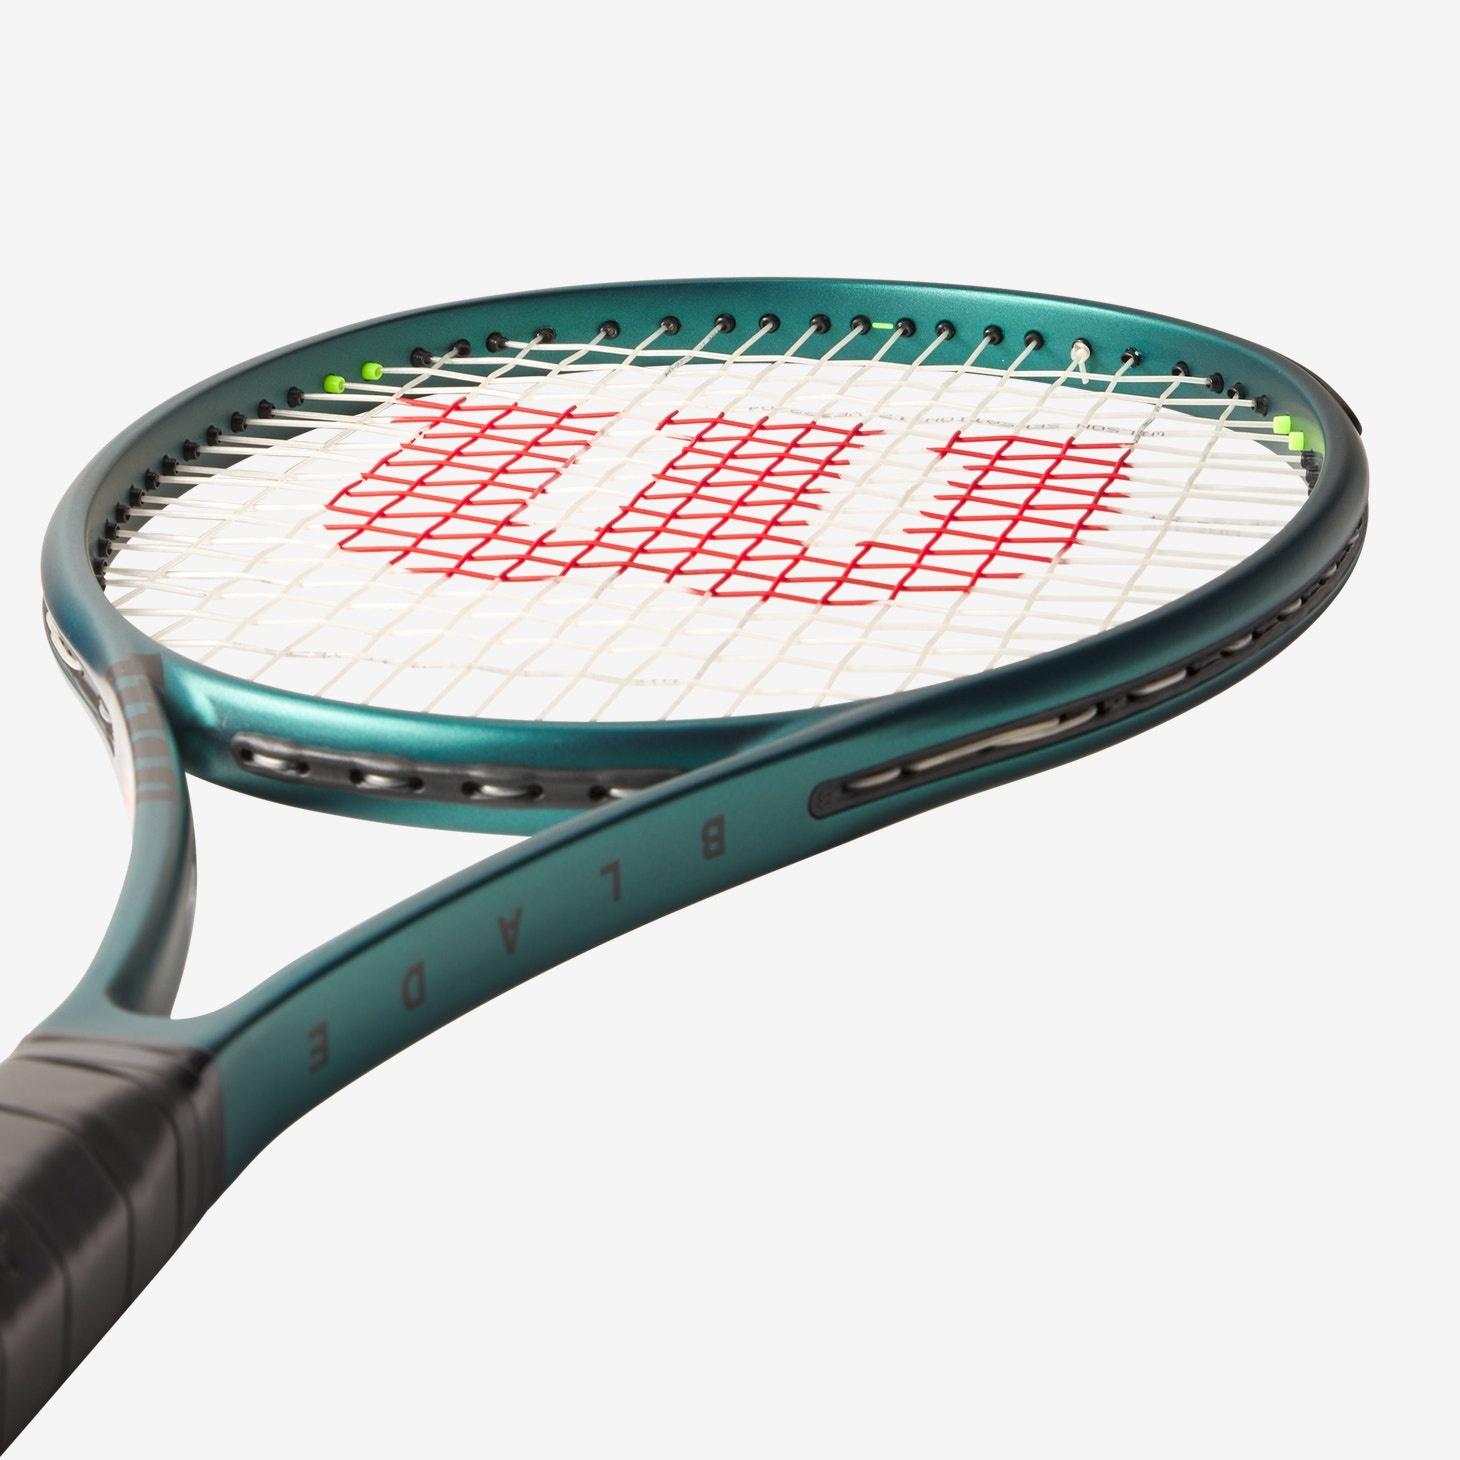 Blade 98 16x19 V9.0 - Tennis Topia - Best Sale Prices and Service 